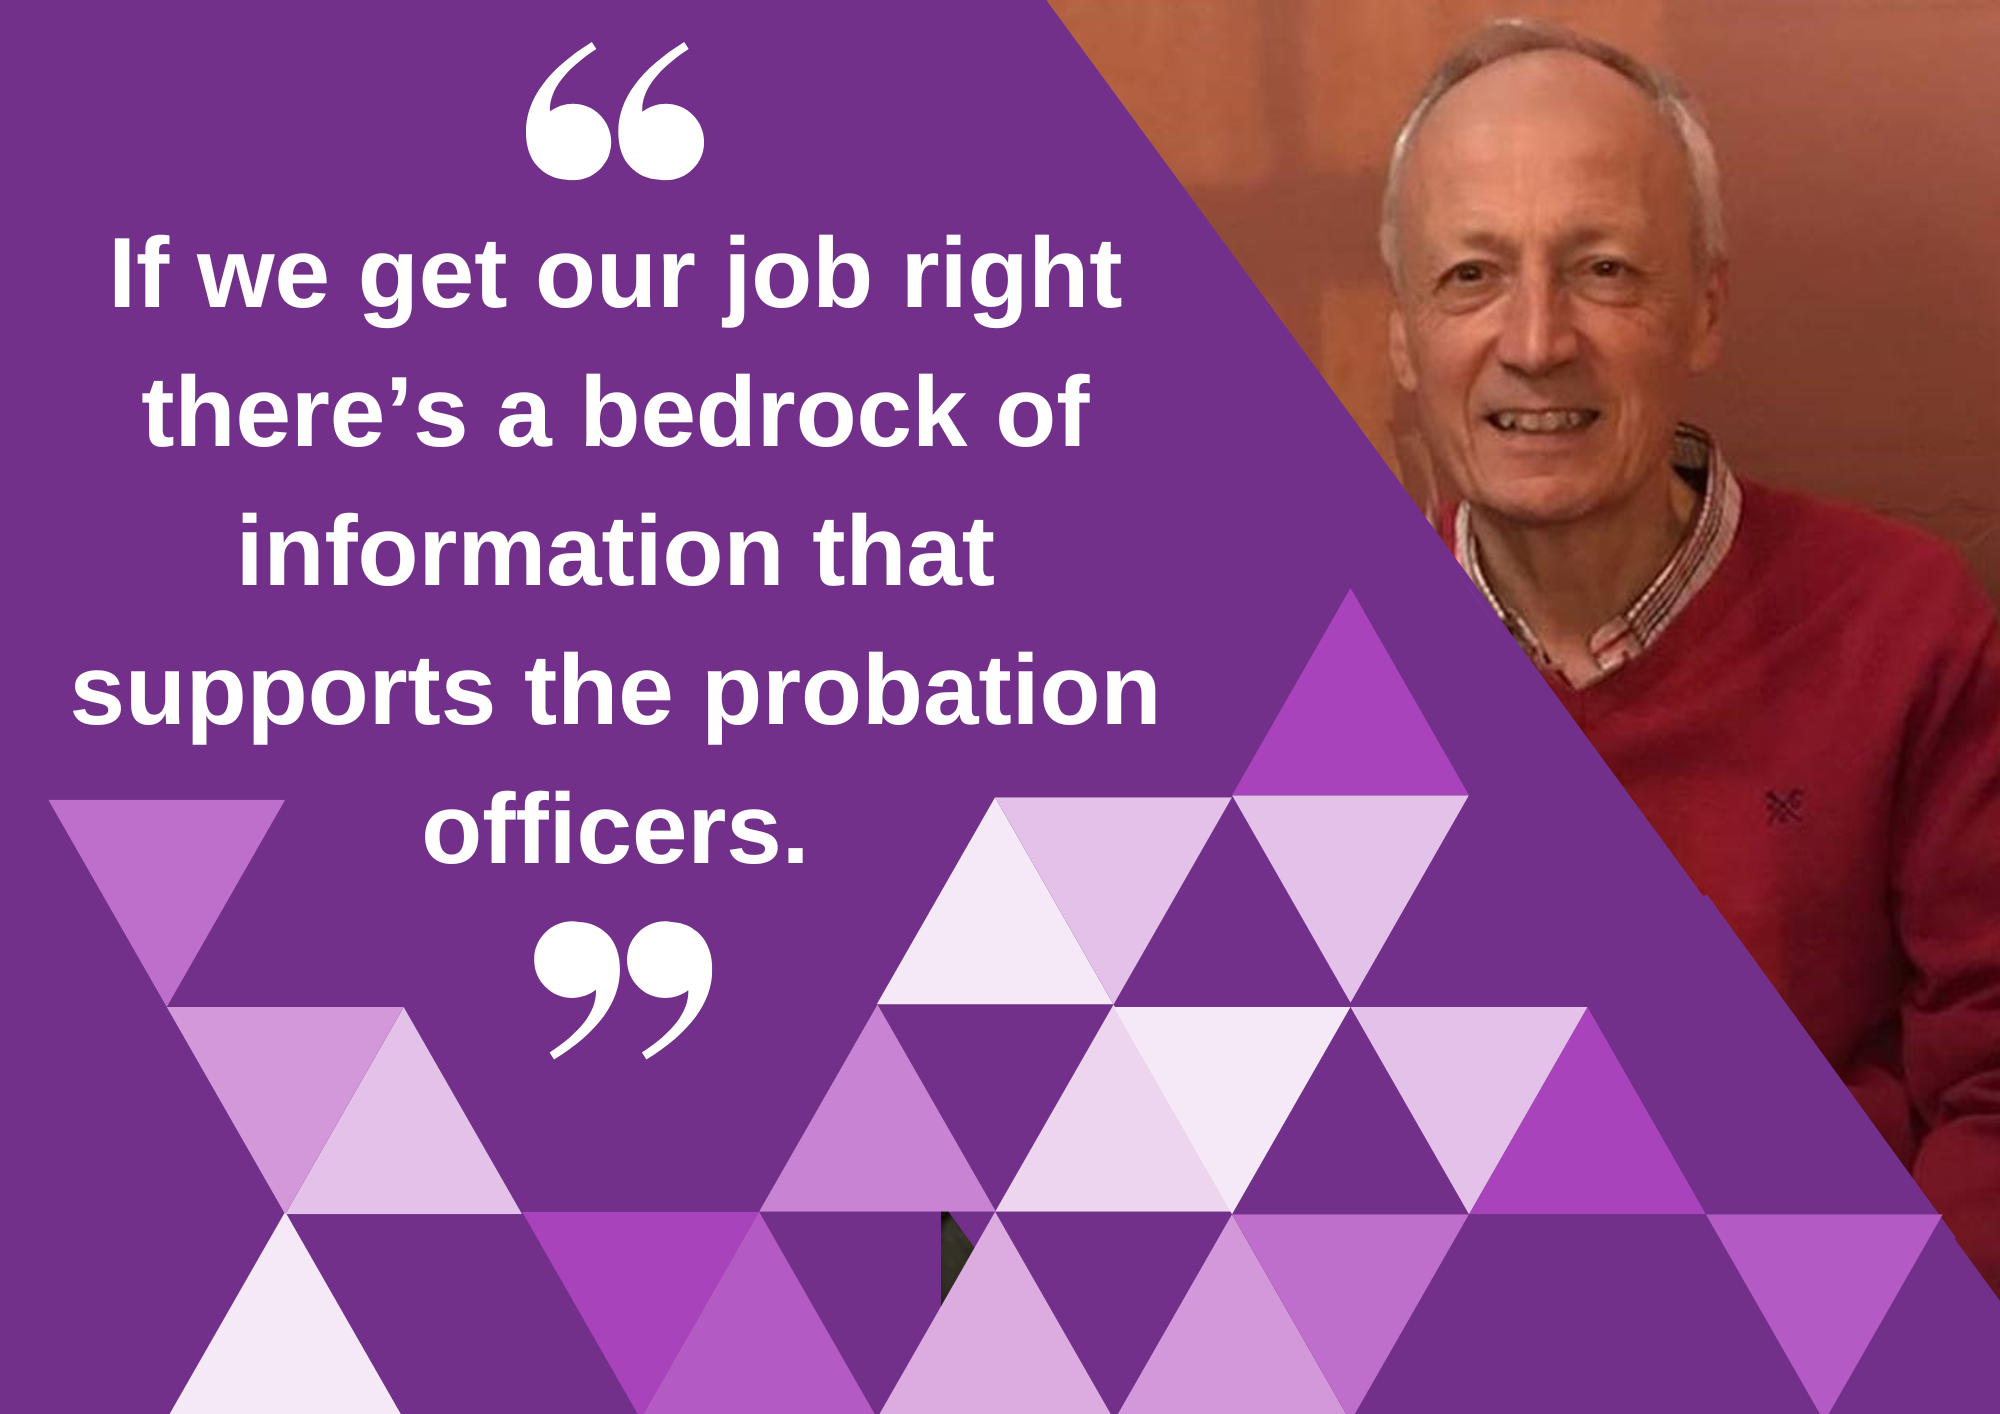 "If we get our job right there's a bedrock of information that supports the probation officers."